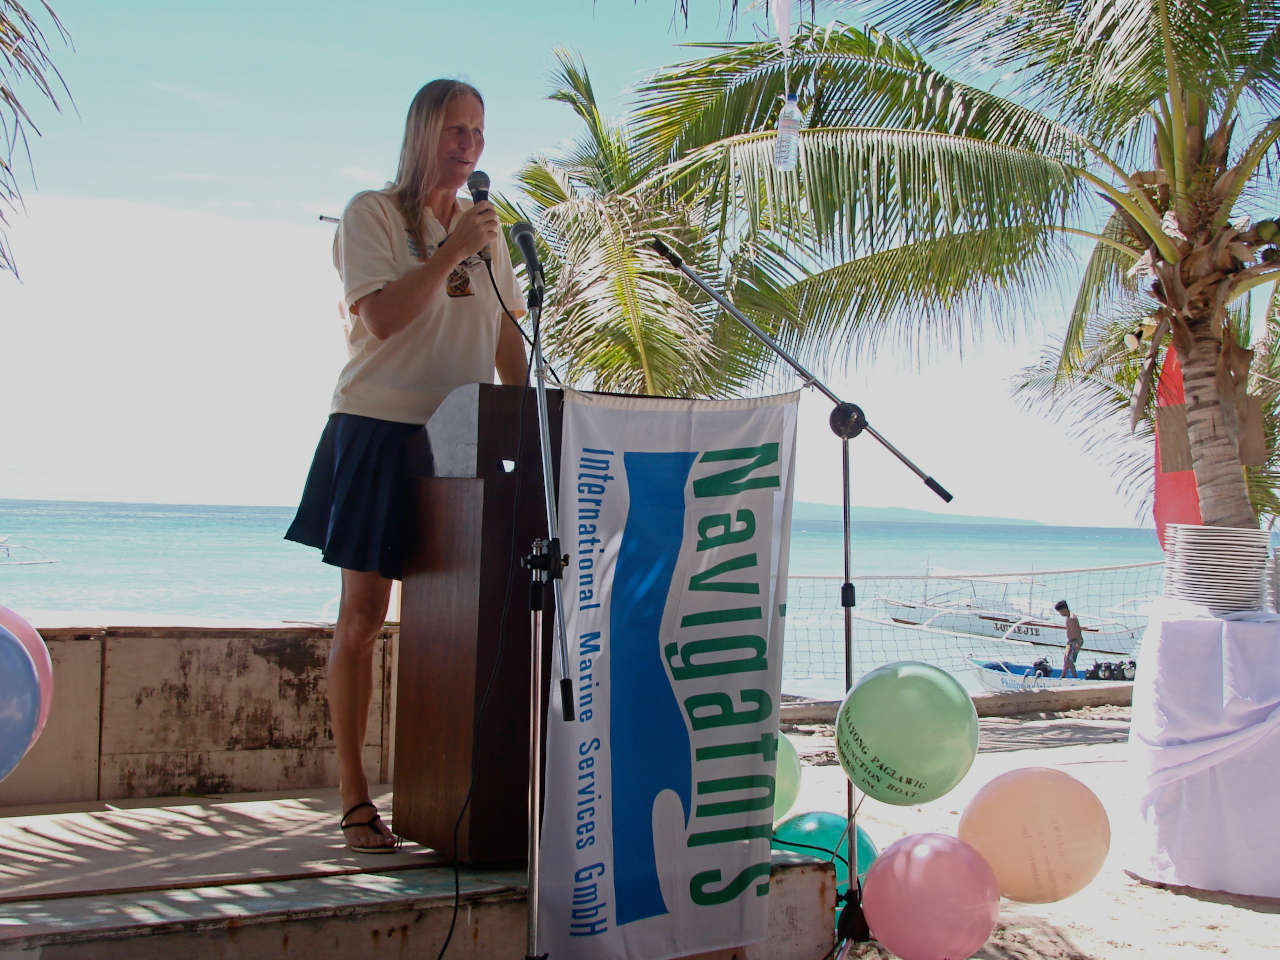 Hanneke speaking at a launch ceremony